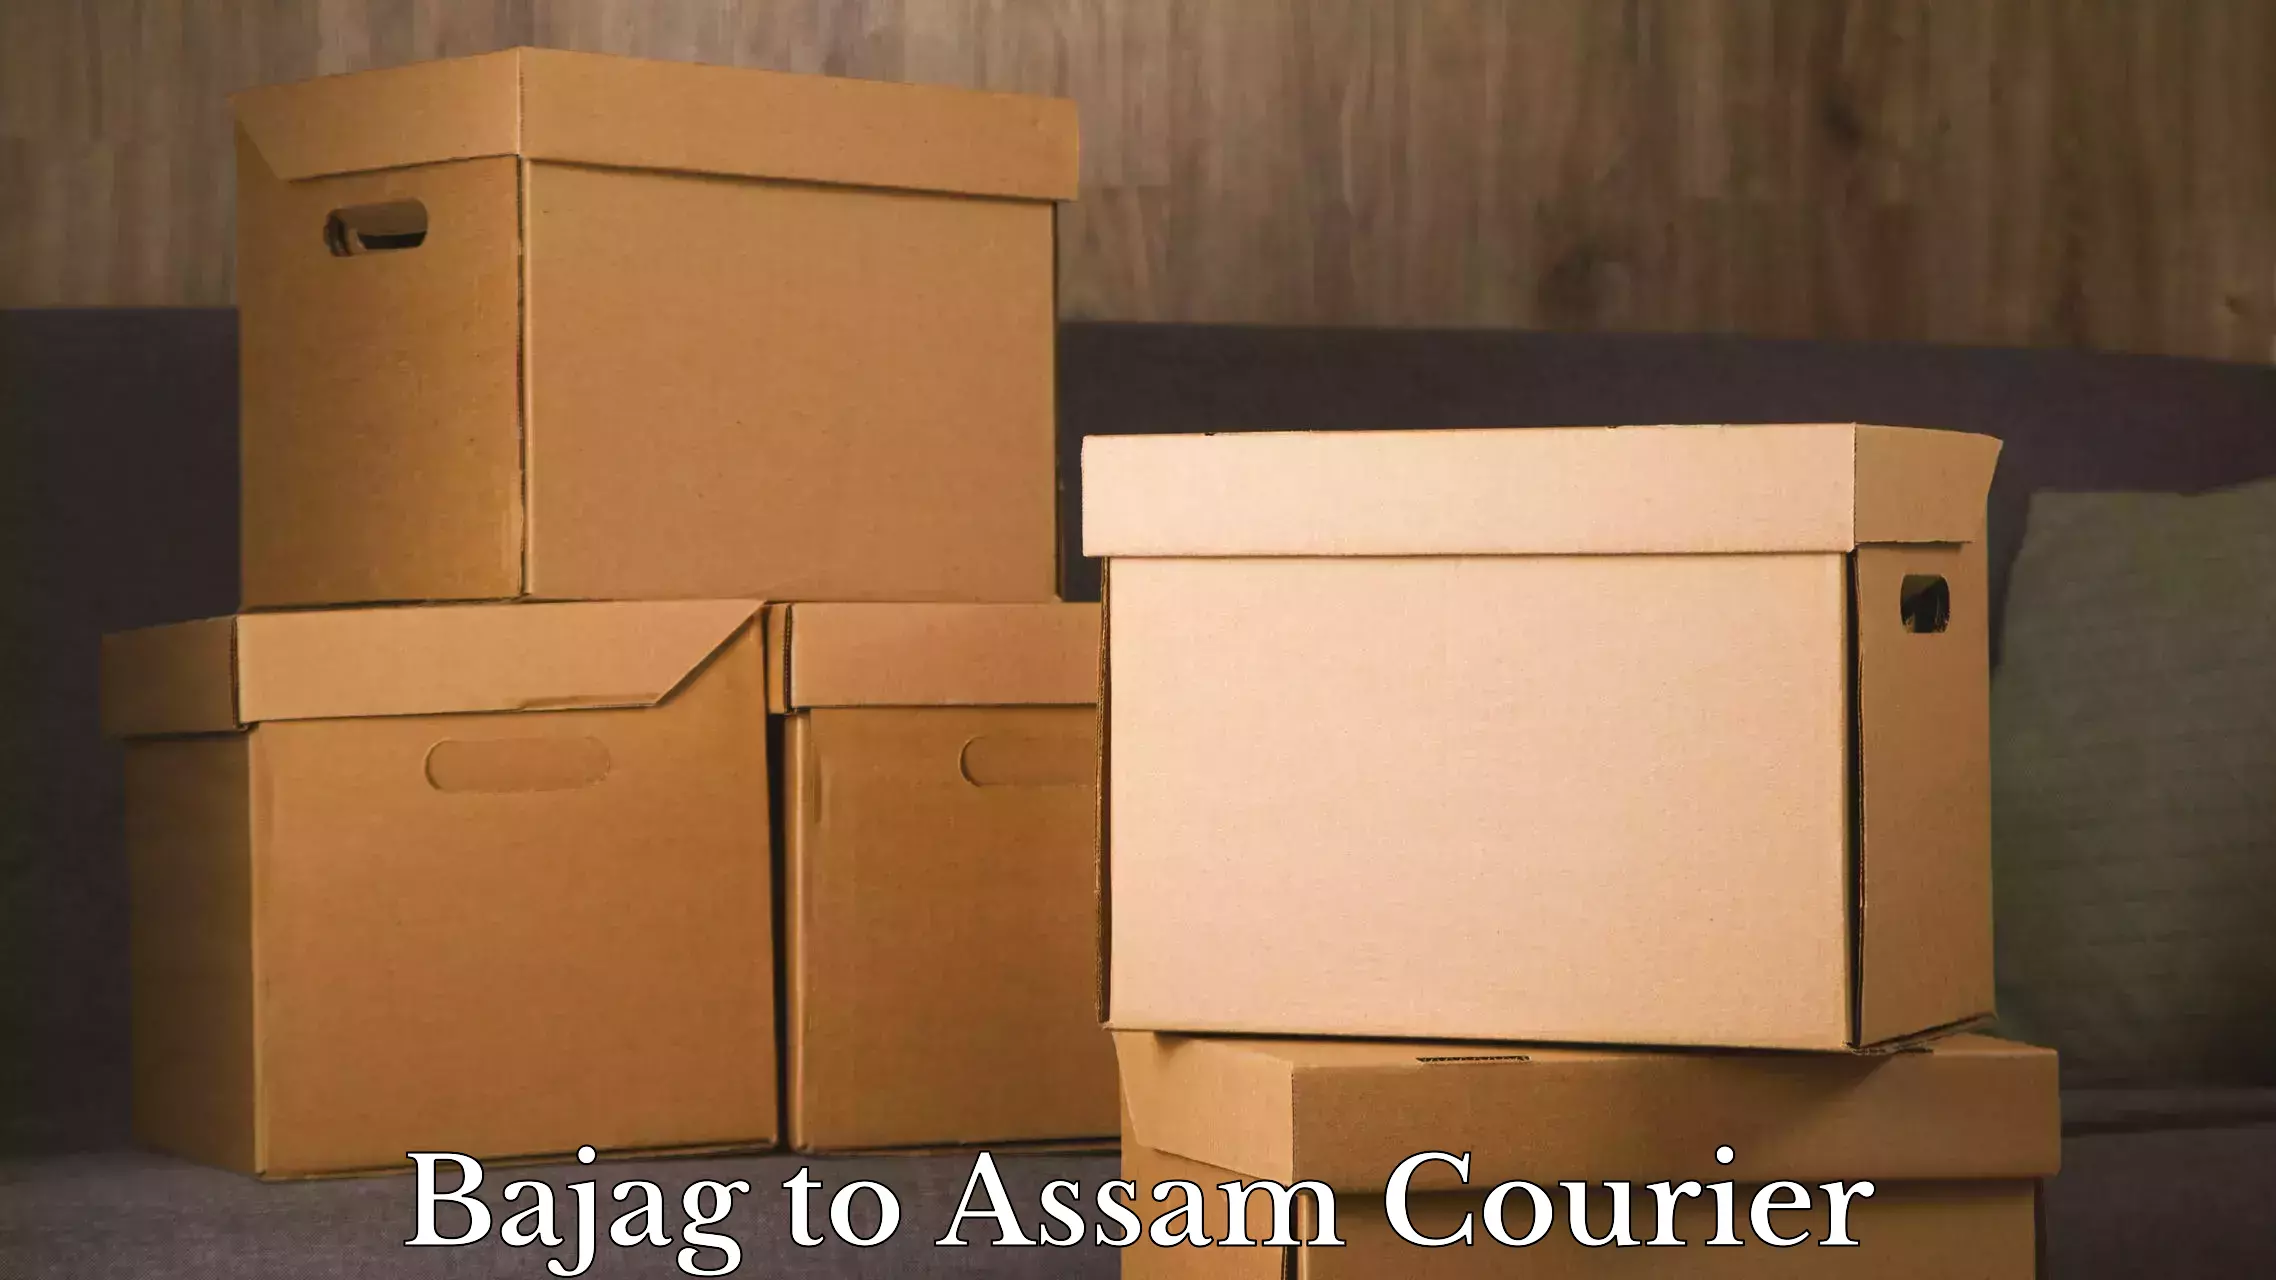 Baggage relocation service Bajag to Assam